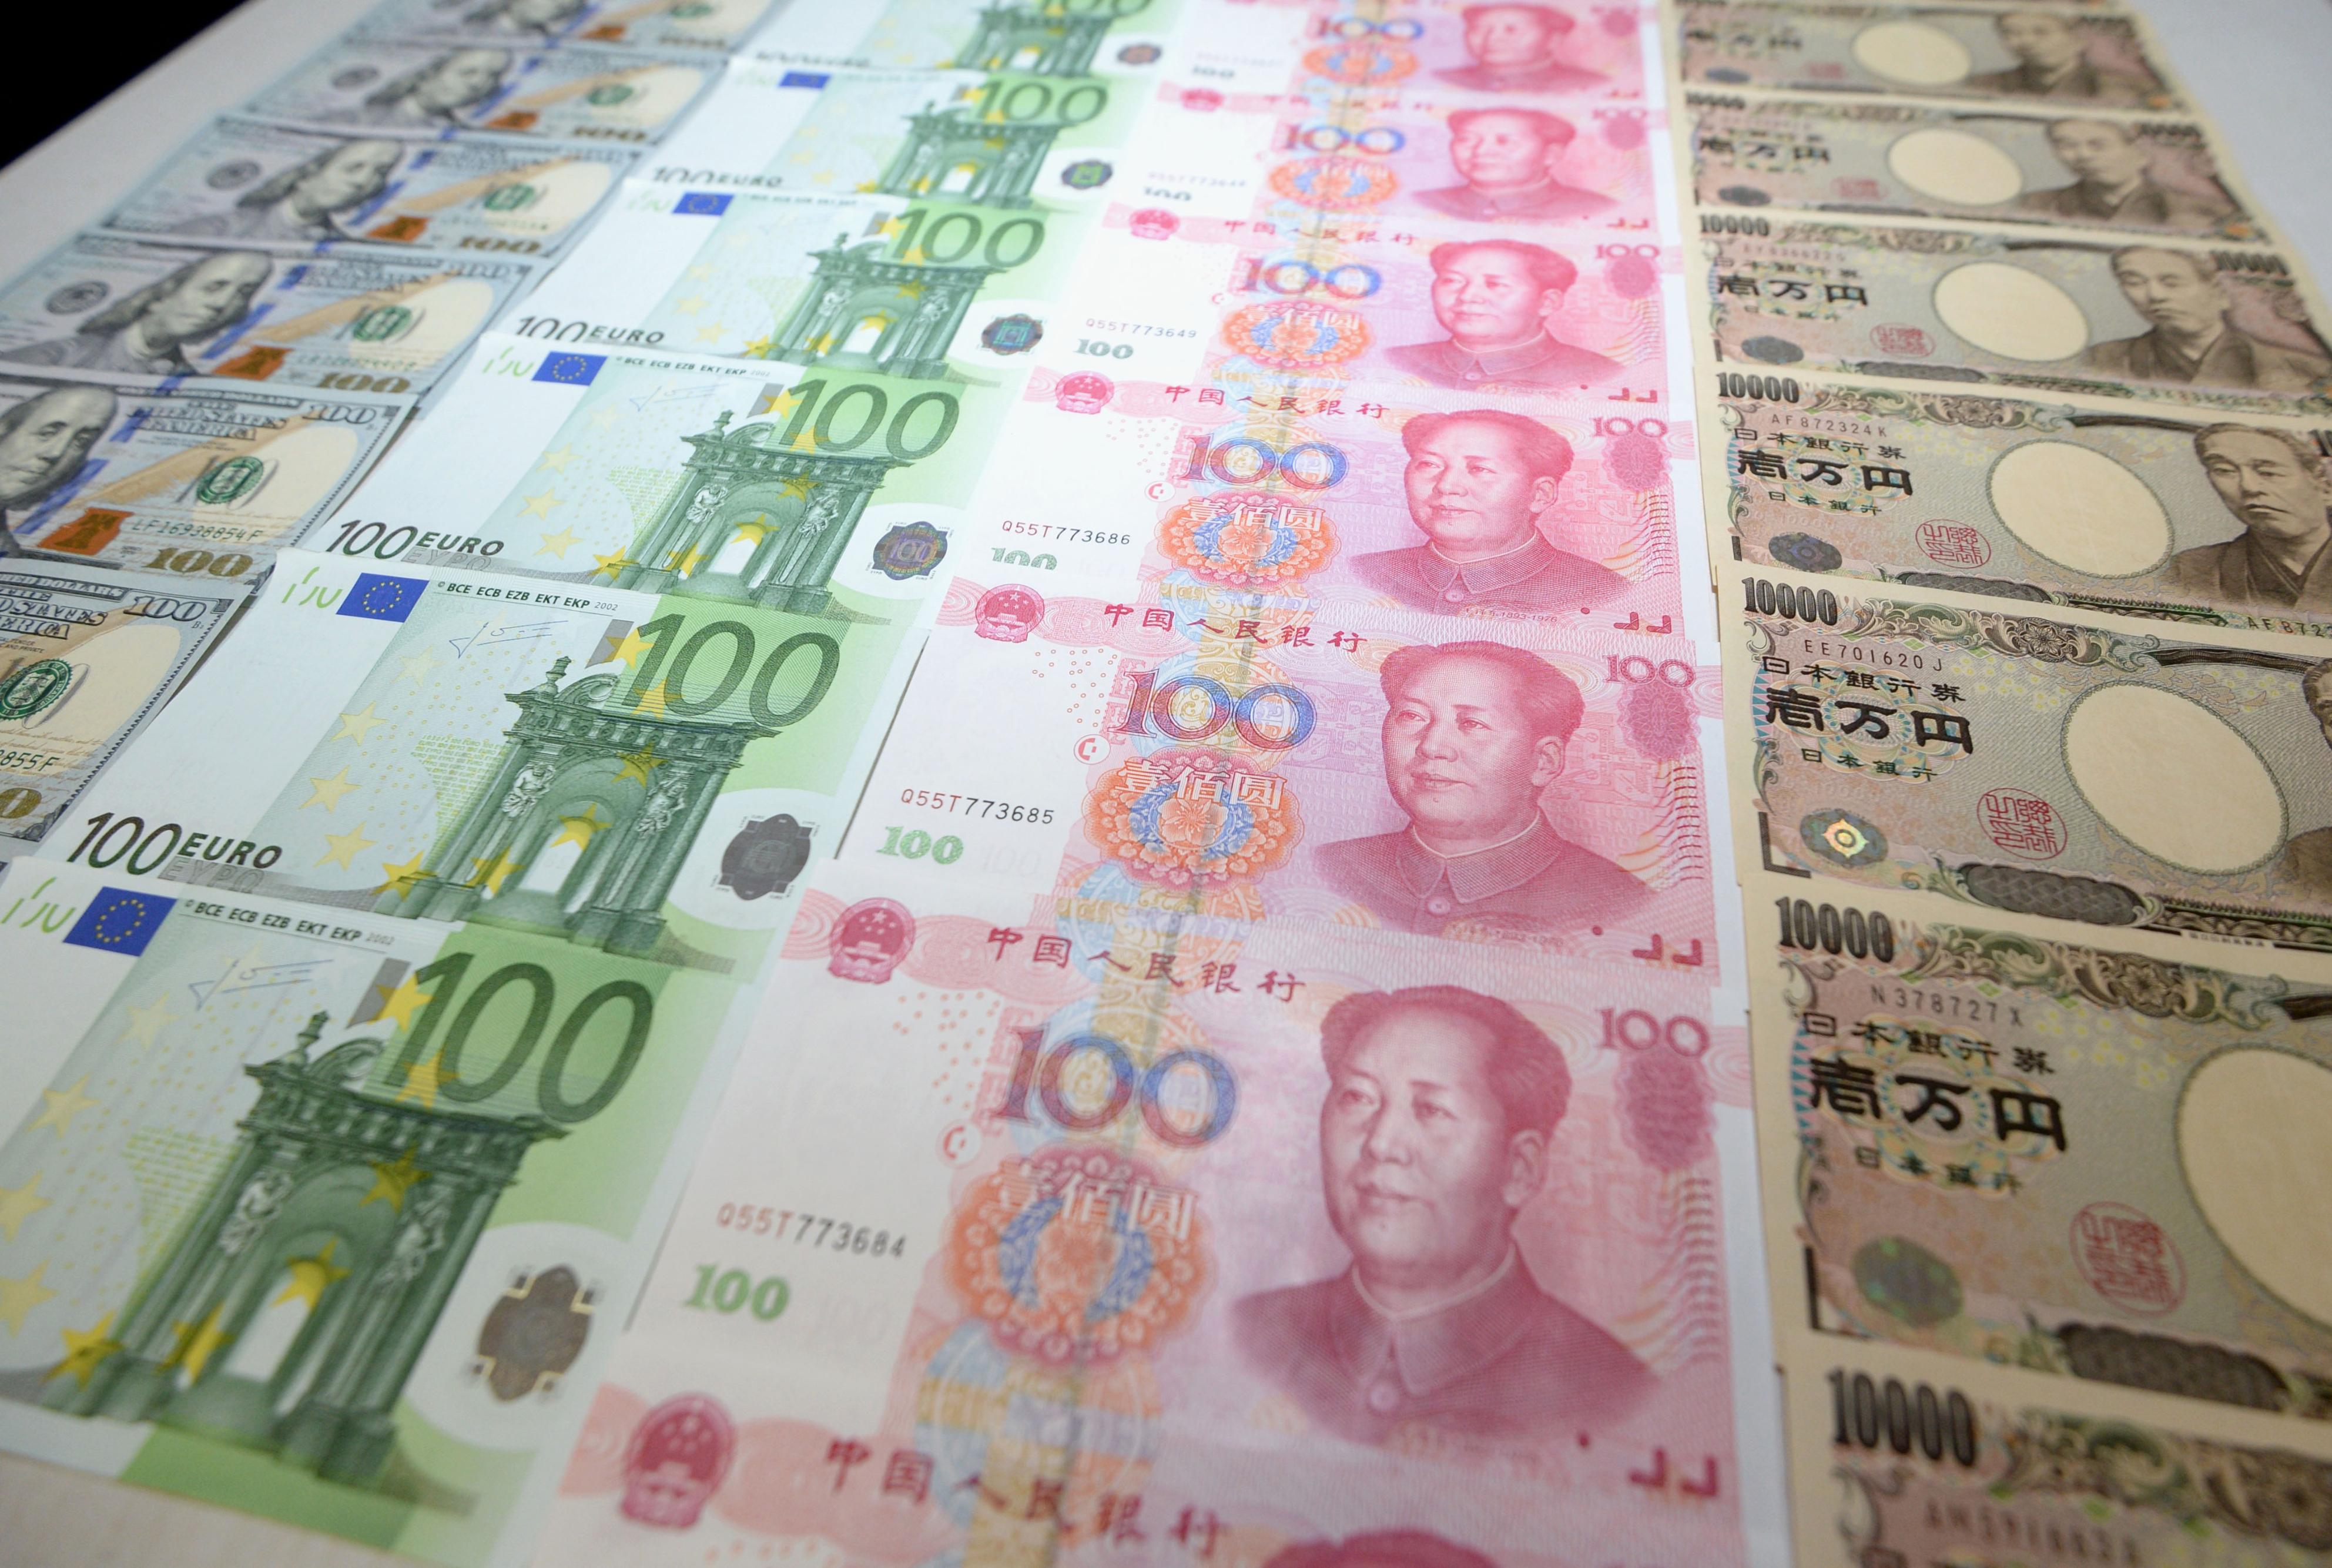 IMF poised to put Chinese yuan in SDR currency basket